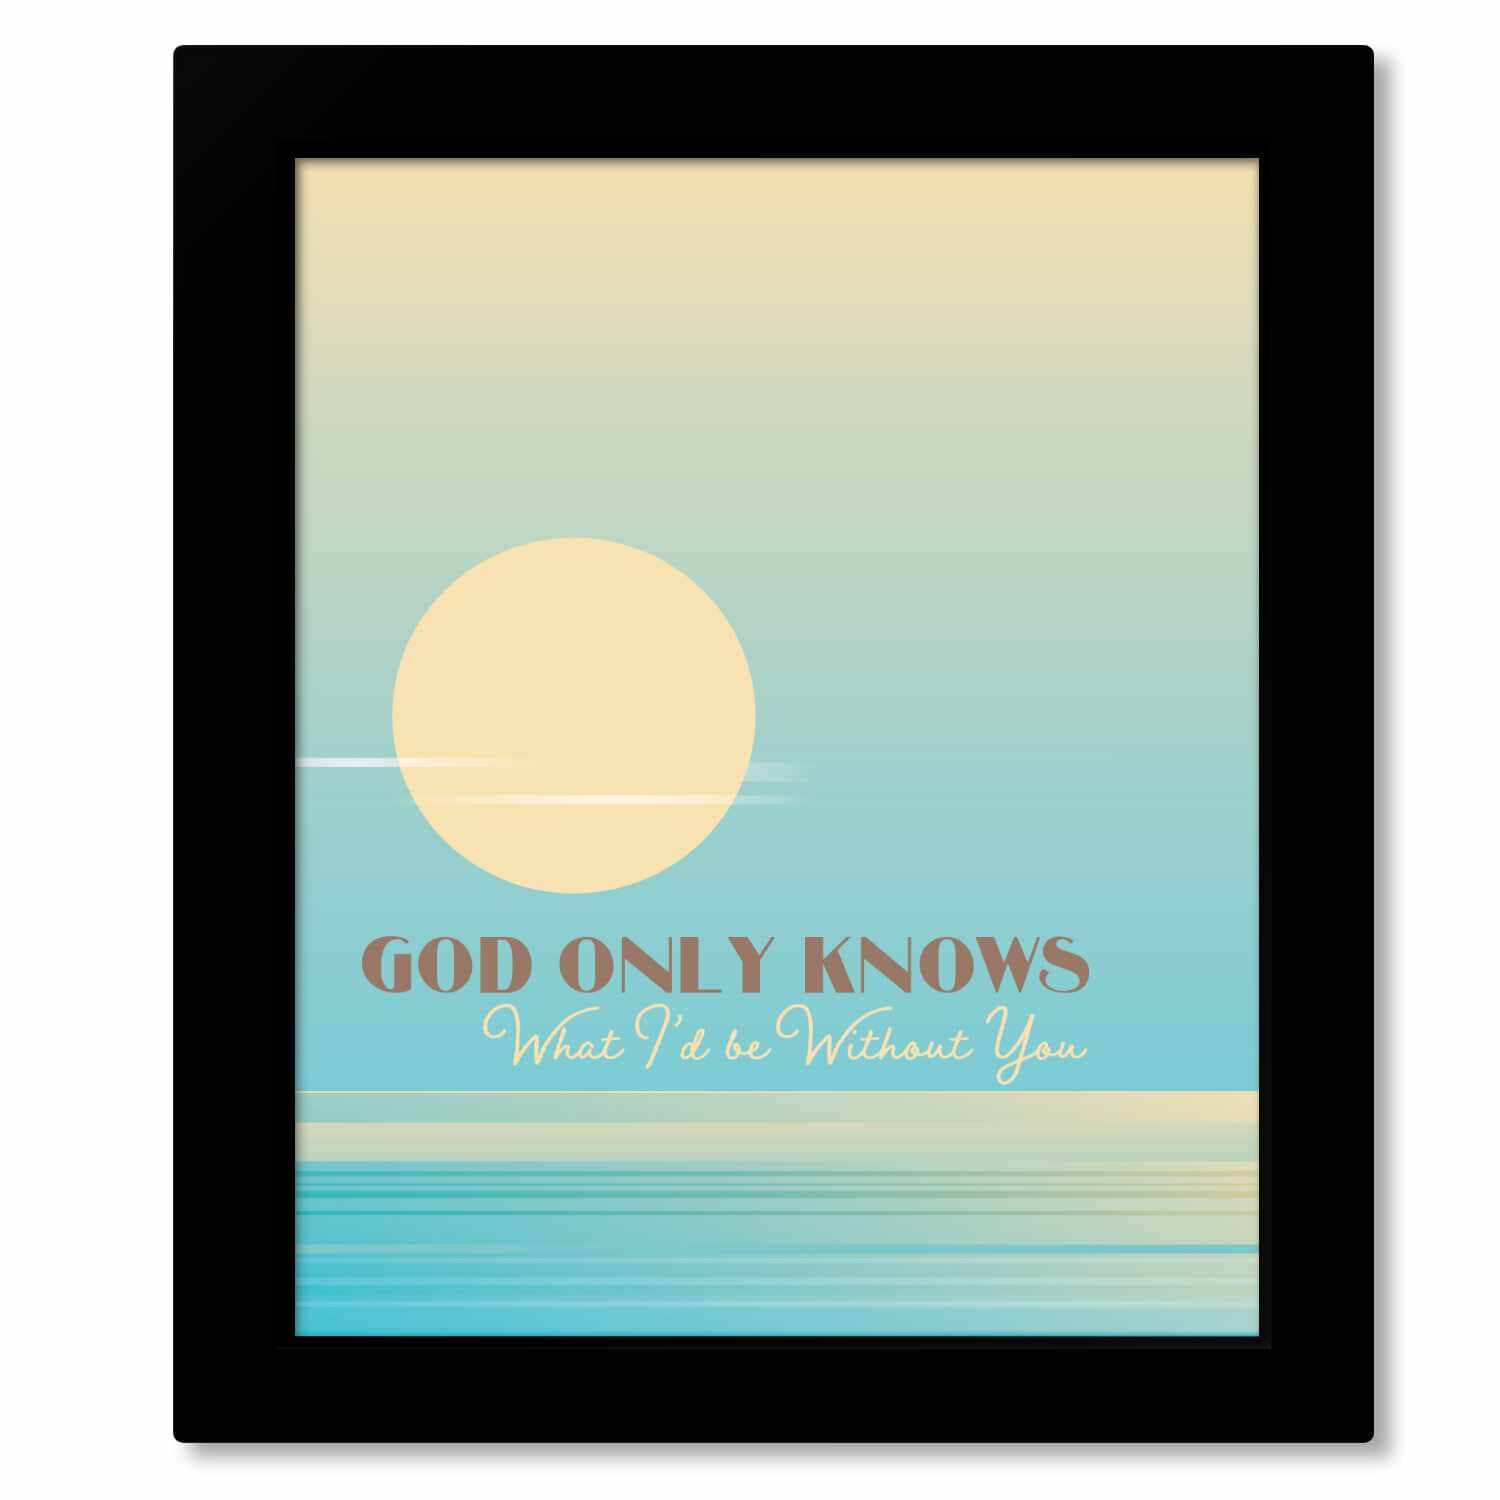 God Only Knows by the Beach Boys - Song Lyric Wall Art Song Lyrics Art Song Lyrics Art 8x10 Framed Print (without mat) 